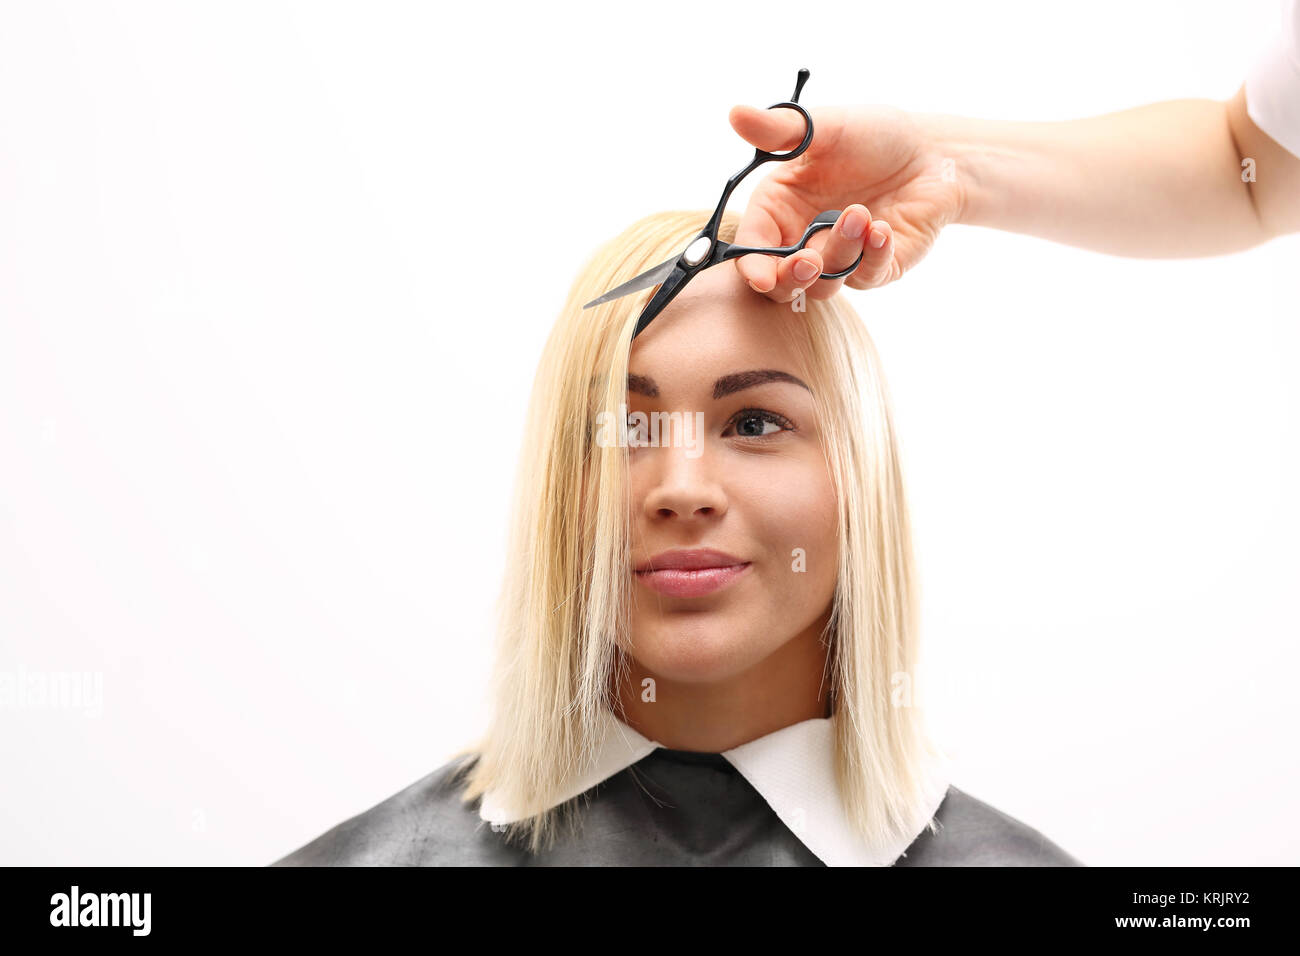 a woman at the hairdresser's Stock Photo